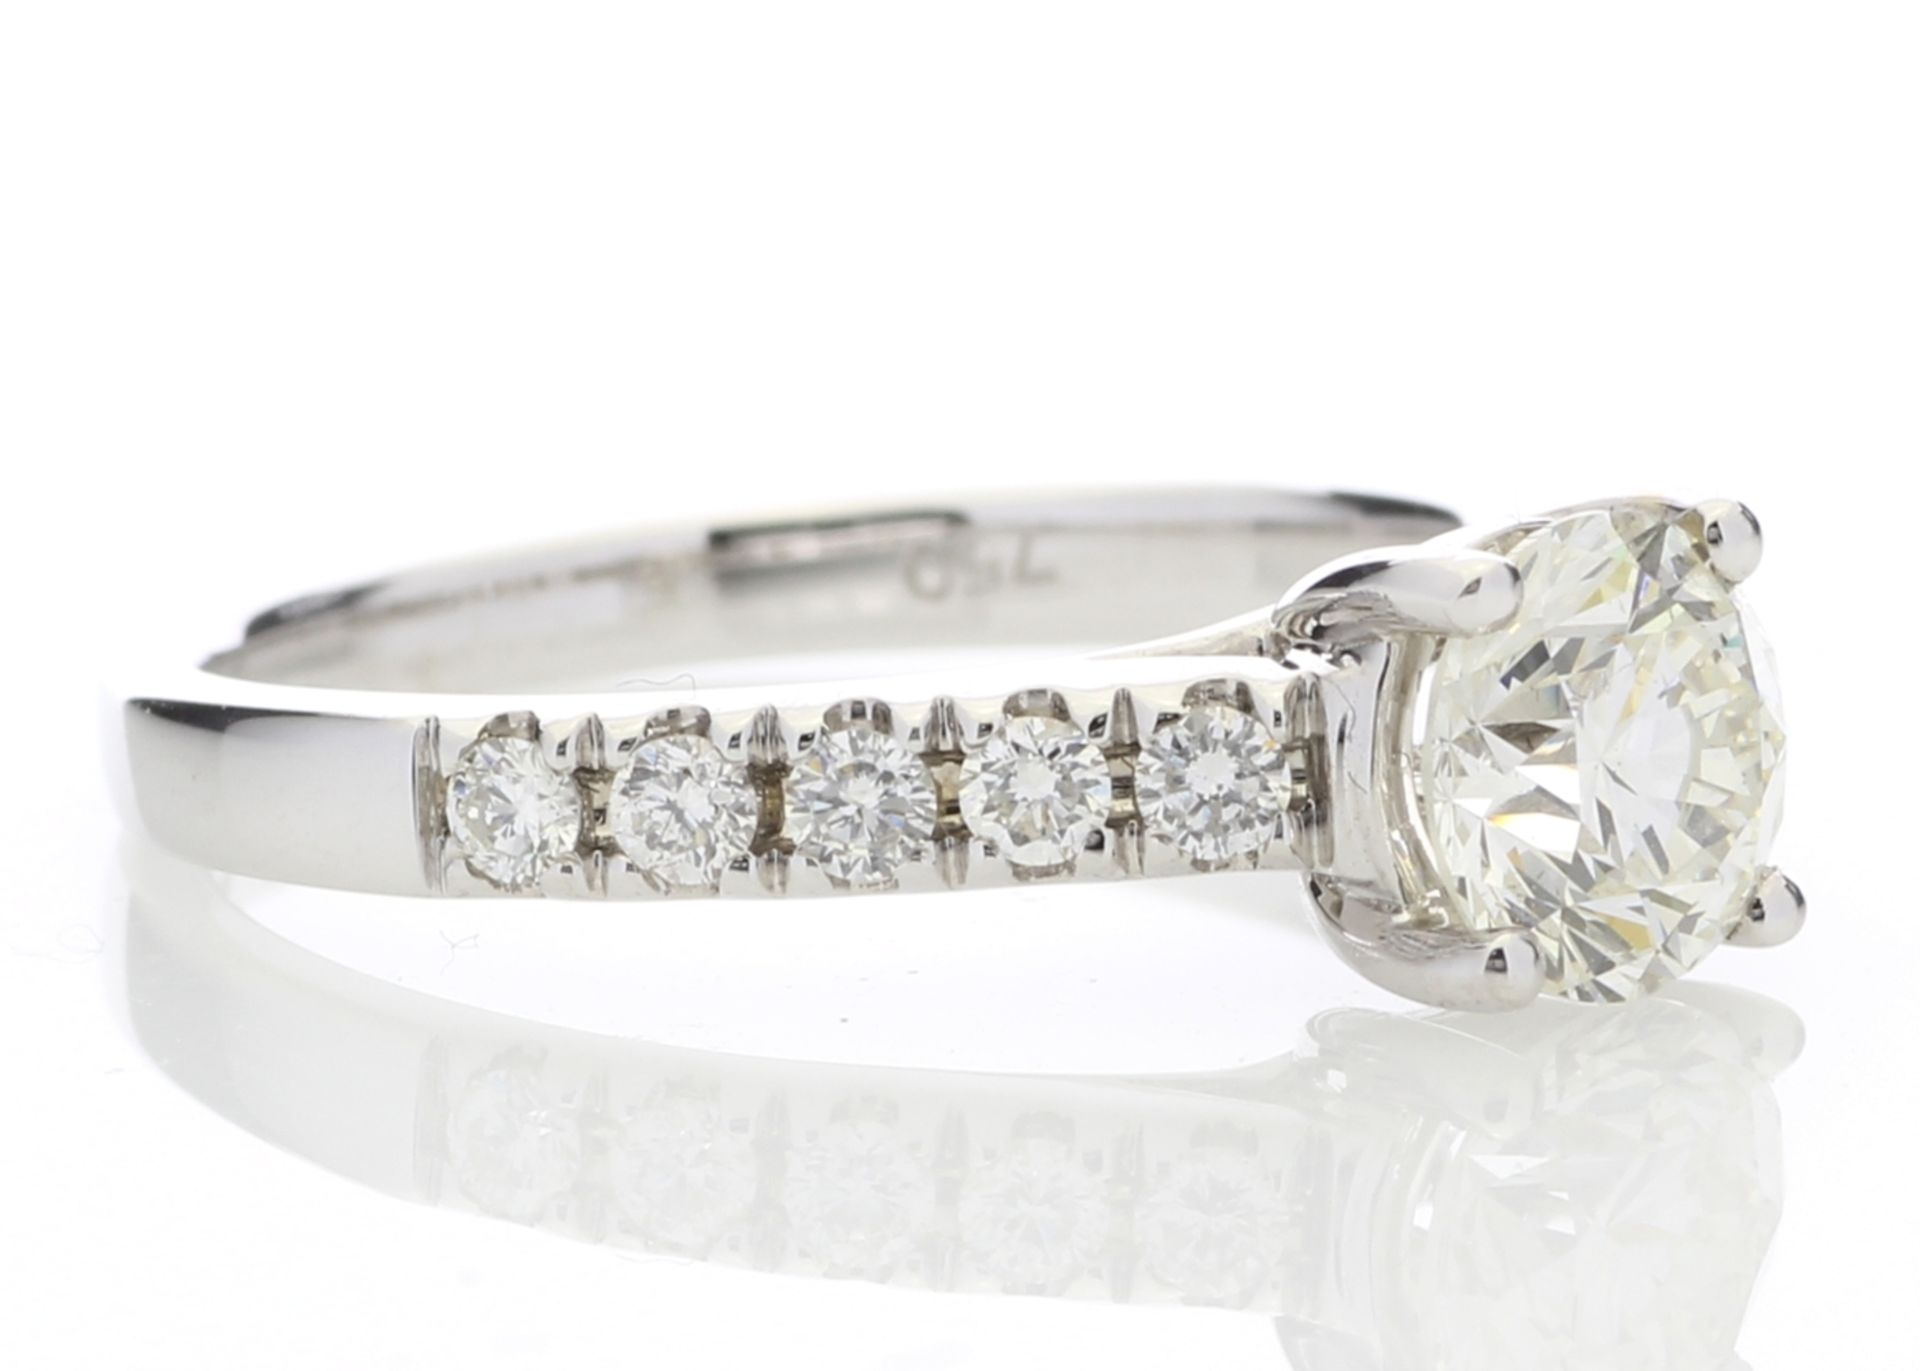 18ct White Gold Single Stone Diamond Ring With Stone Set Shoulders (1.02) 1.32 - Image 3 of 4